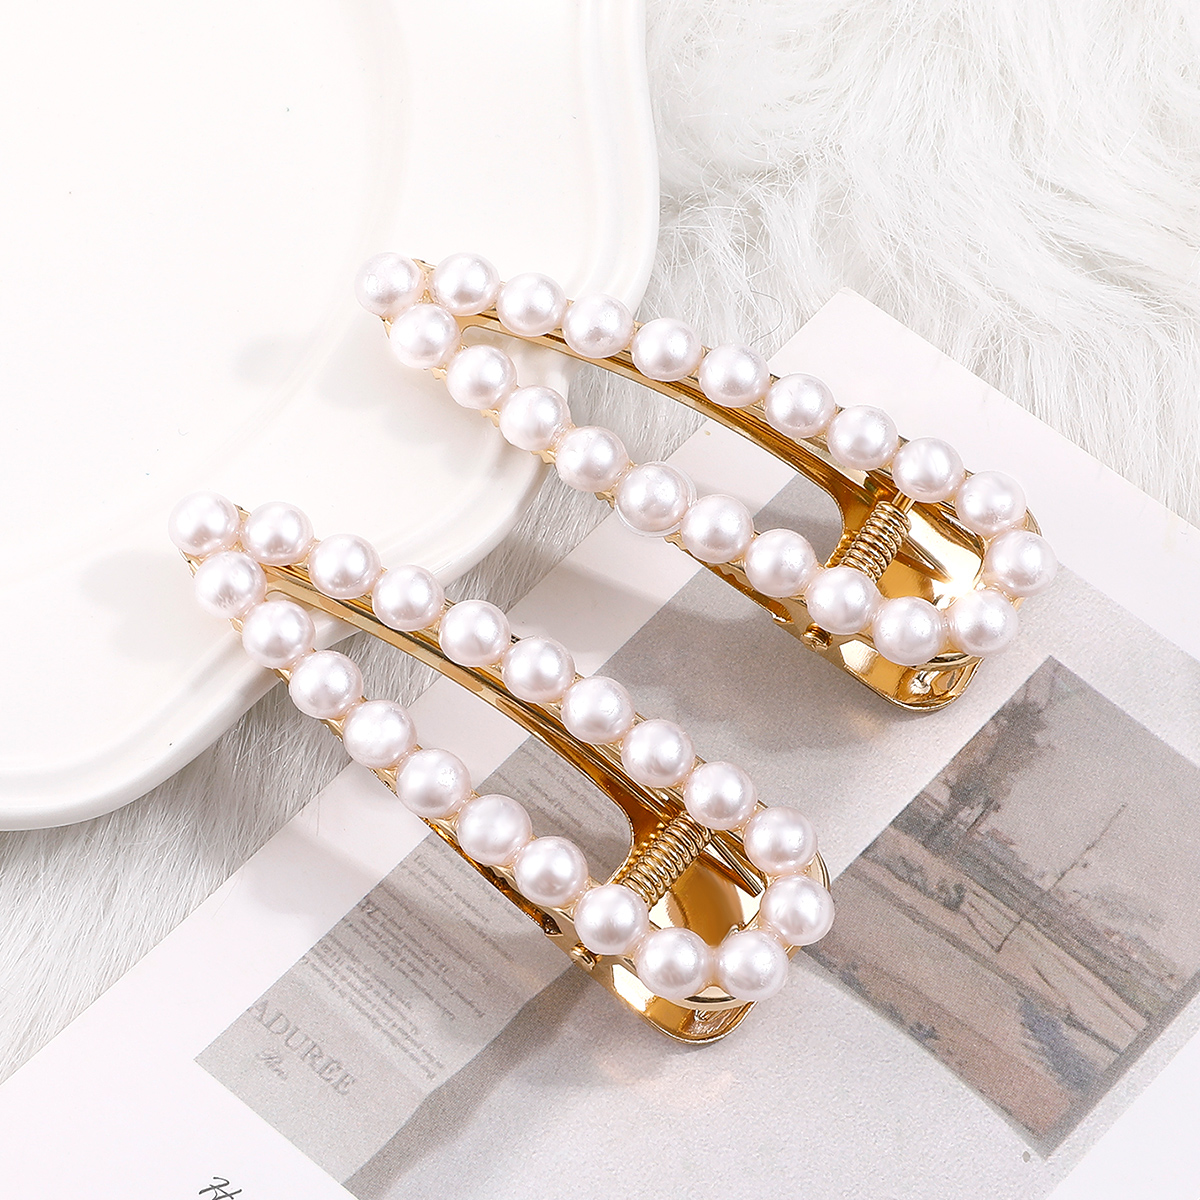 WomenS Fashion Geometric Alloy Hair Accessories Inlaid Pearls Artificial Pearls Hair Clip 1 Setpicture1